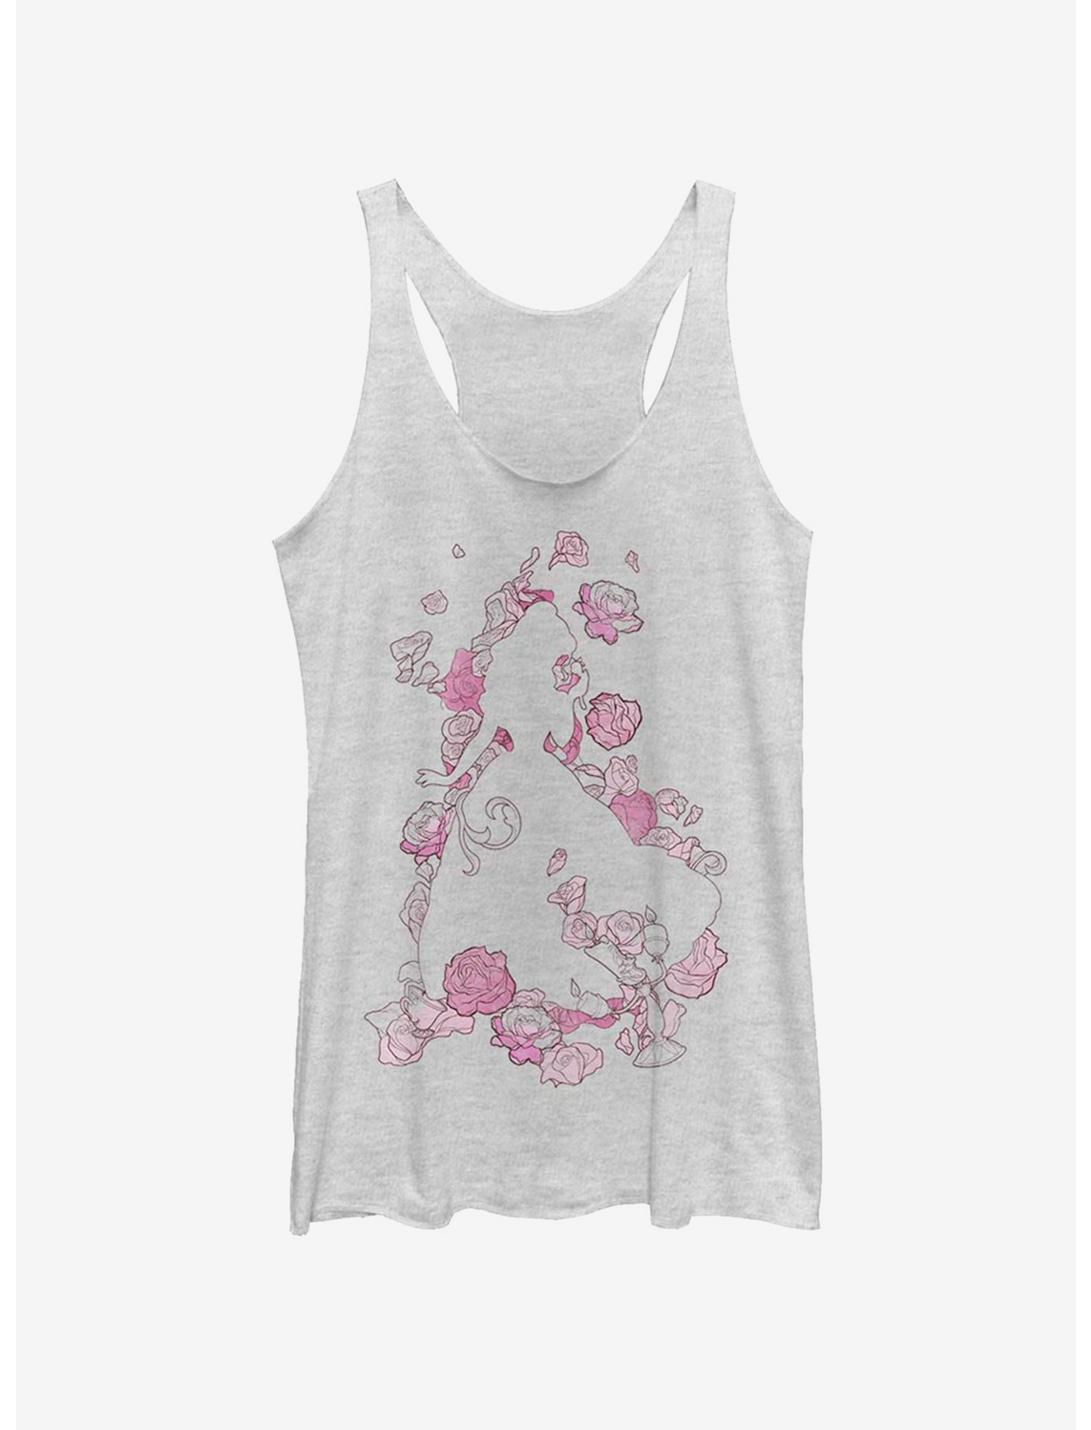 Disney Beauty And The Beast Beauty Silhouette Girls Tank, WHITE HTR, hi-res